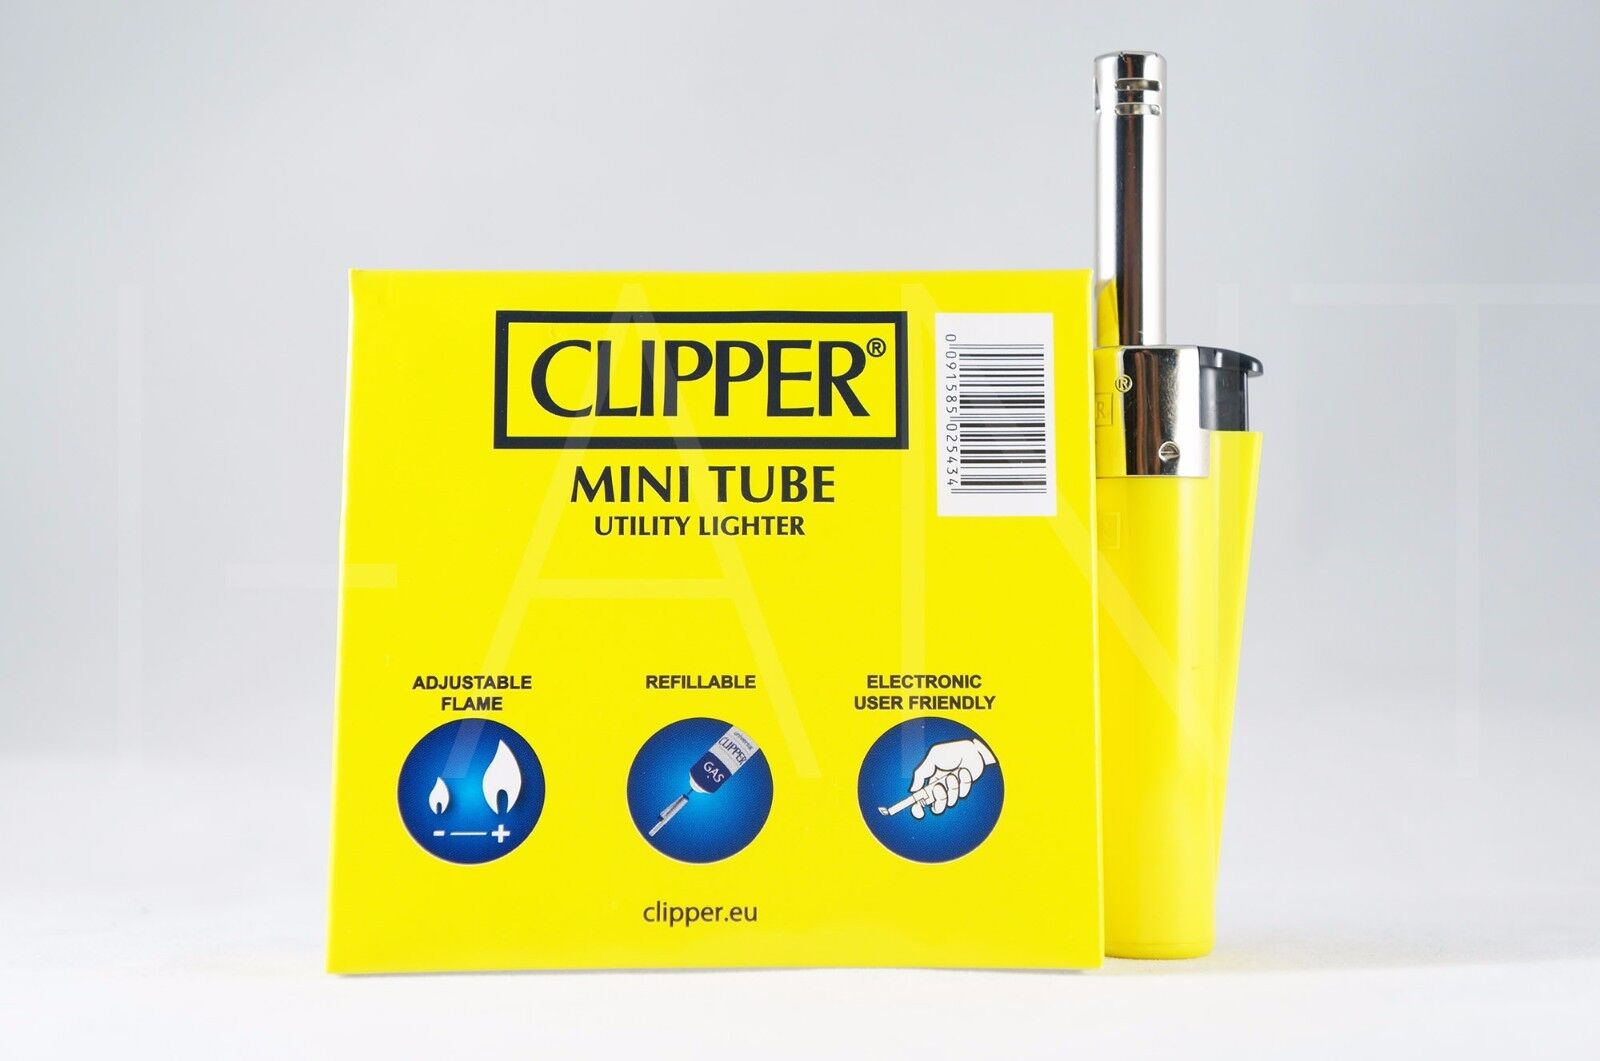 CLIPPER FULL-SIZE TUBE PIEZO IGNITION REFILLABLE ADJUSTABLE FLAME LIGHTER Без бренда - фотография #4